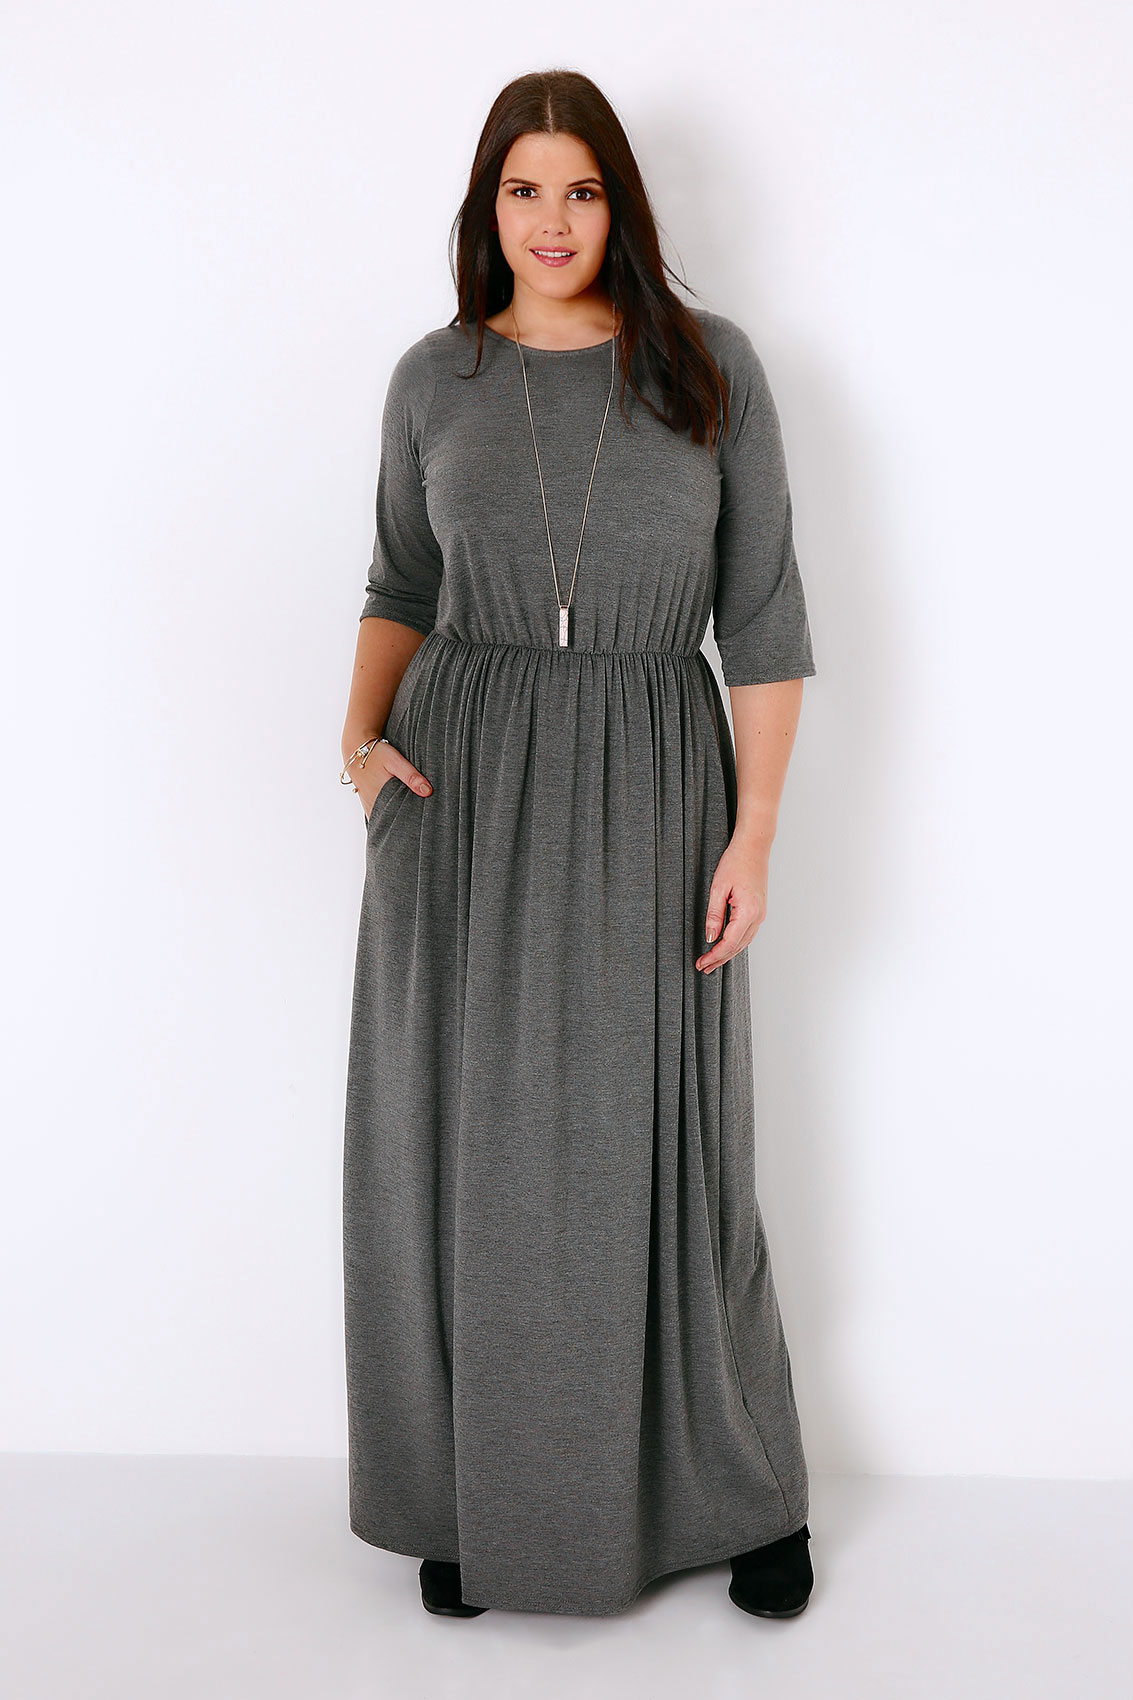 Charcoal Grey Jersey Maxi Dress With Ruched Waist, Plus size 16 to 32